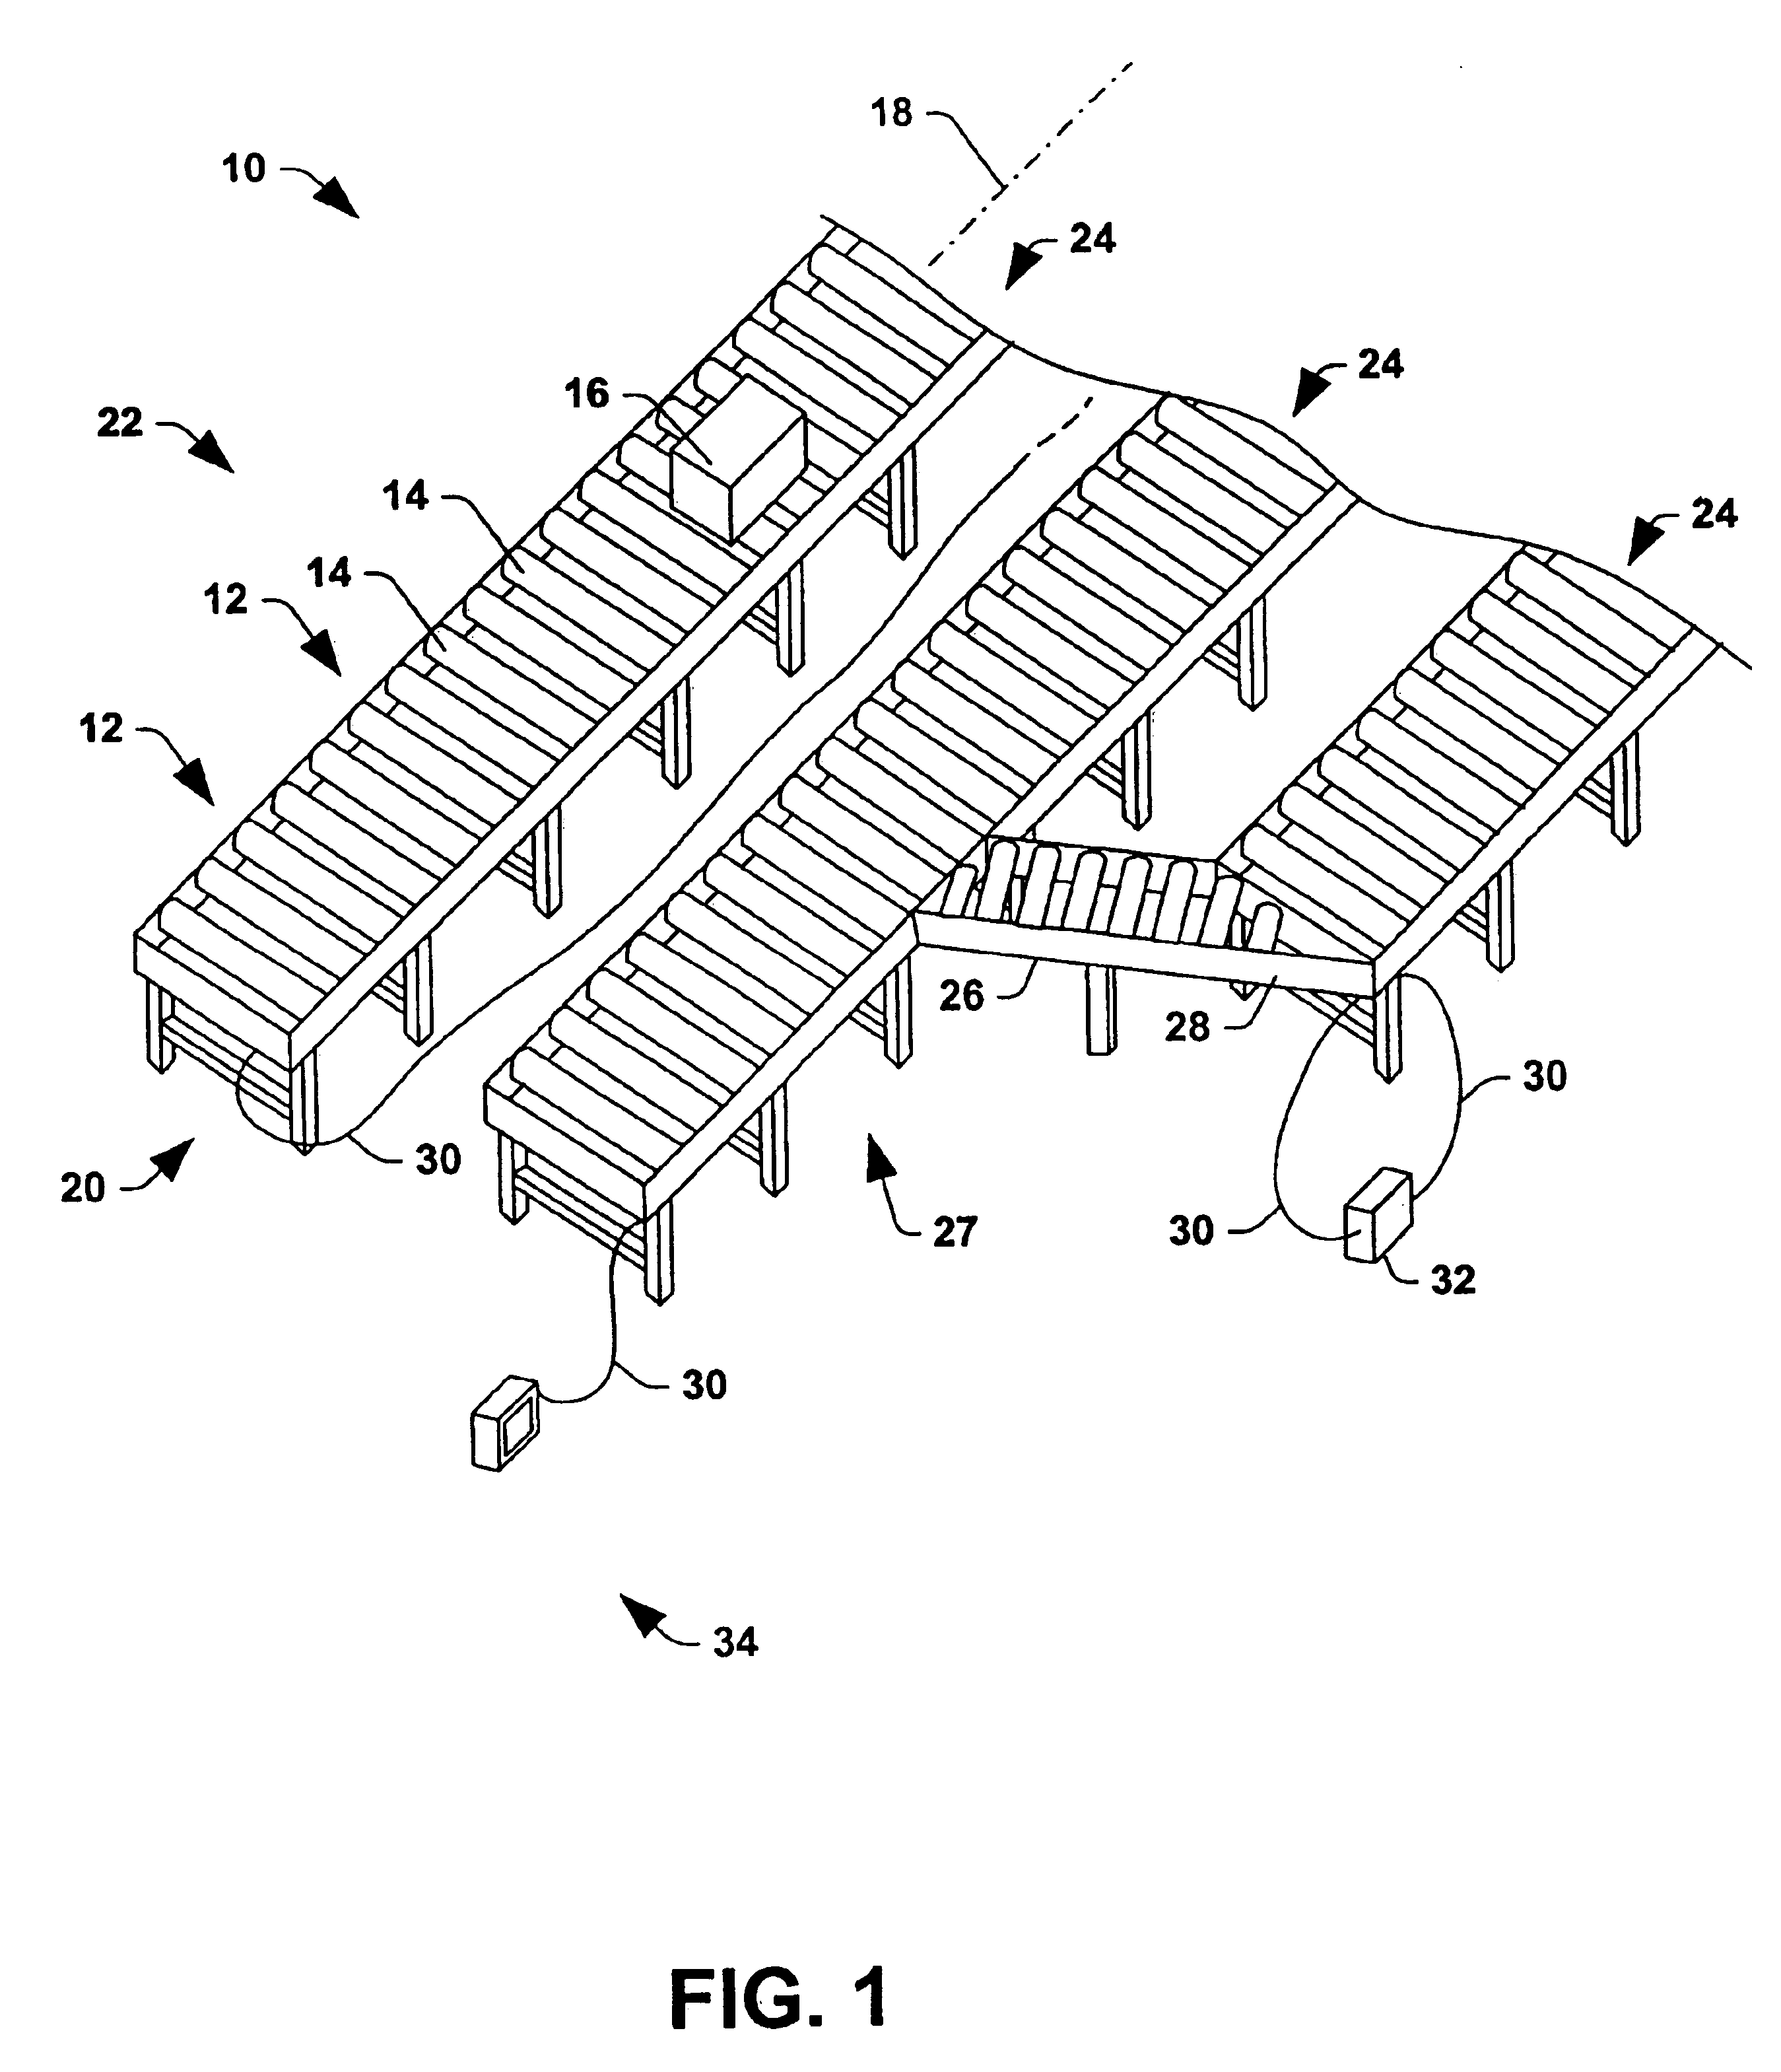 Driver board control system for modular conveyor with address-based network for inter-conveyer communication